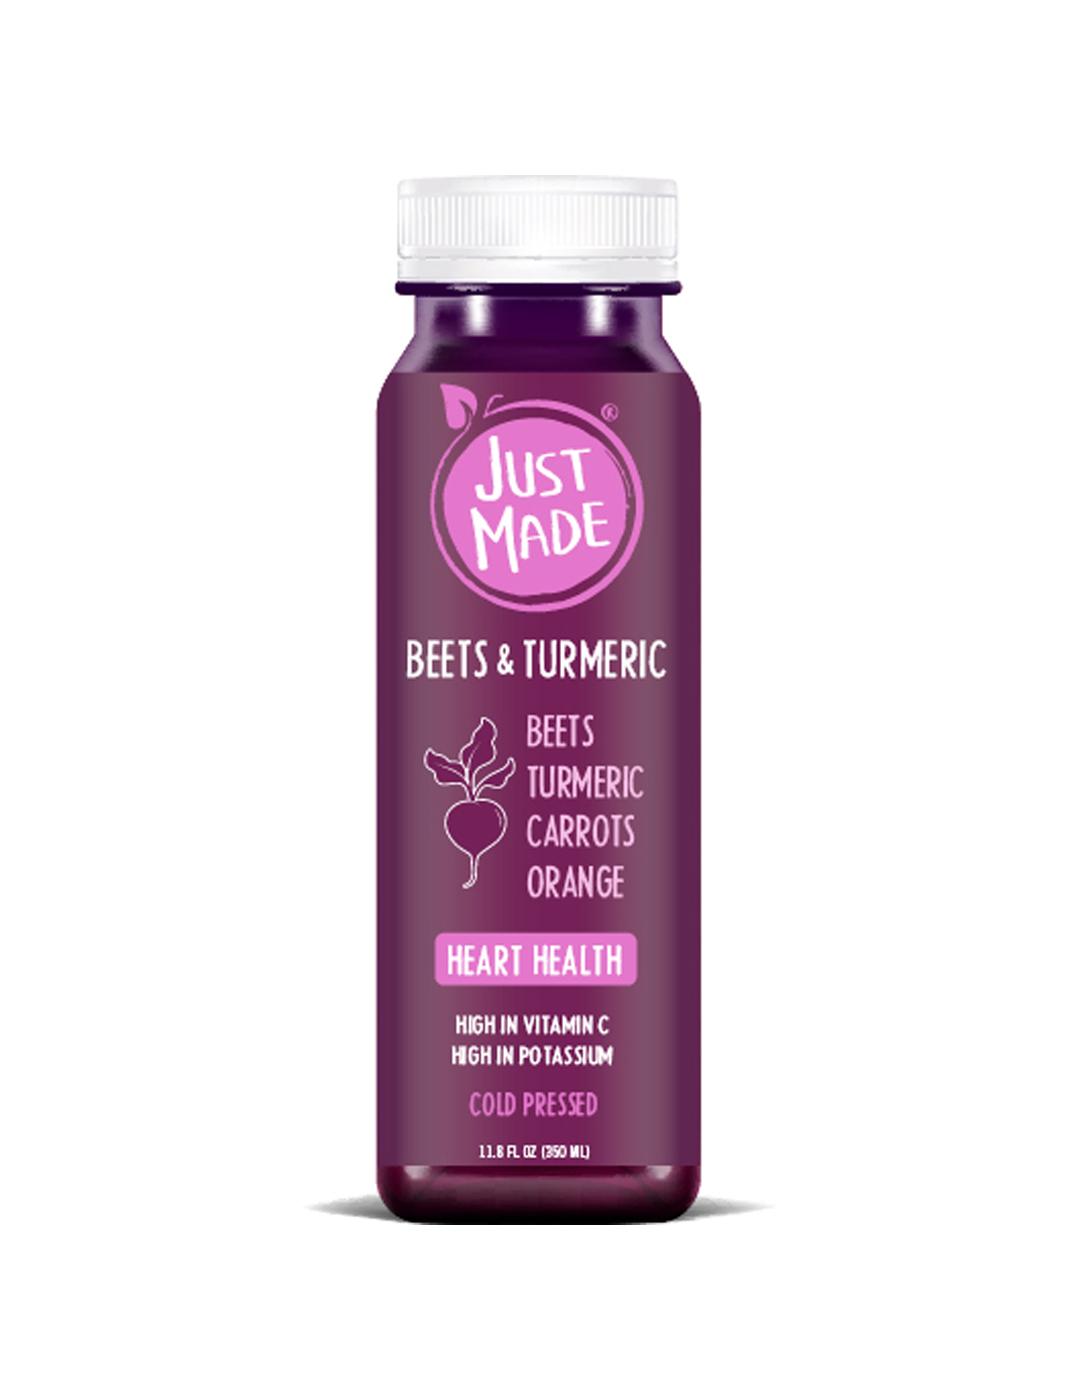 Just Made Beets & Turmeric Heart Health Cold-Pressed Juice; image 1 of 2